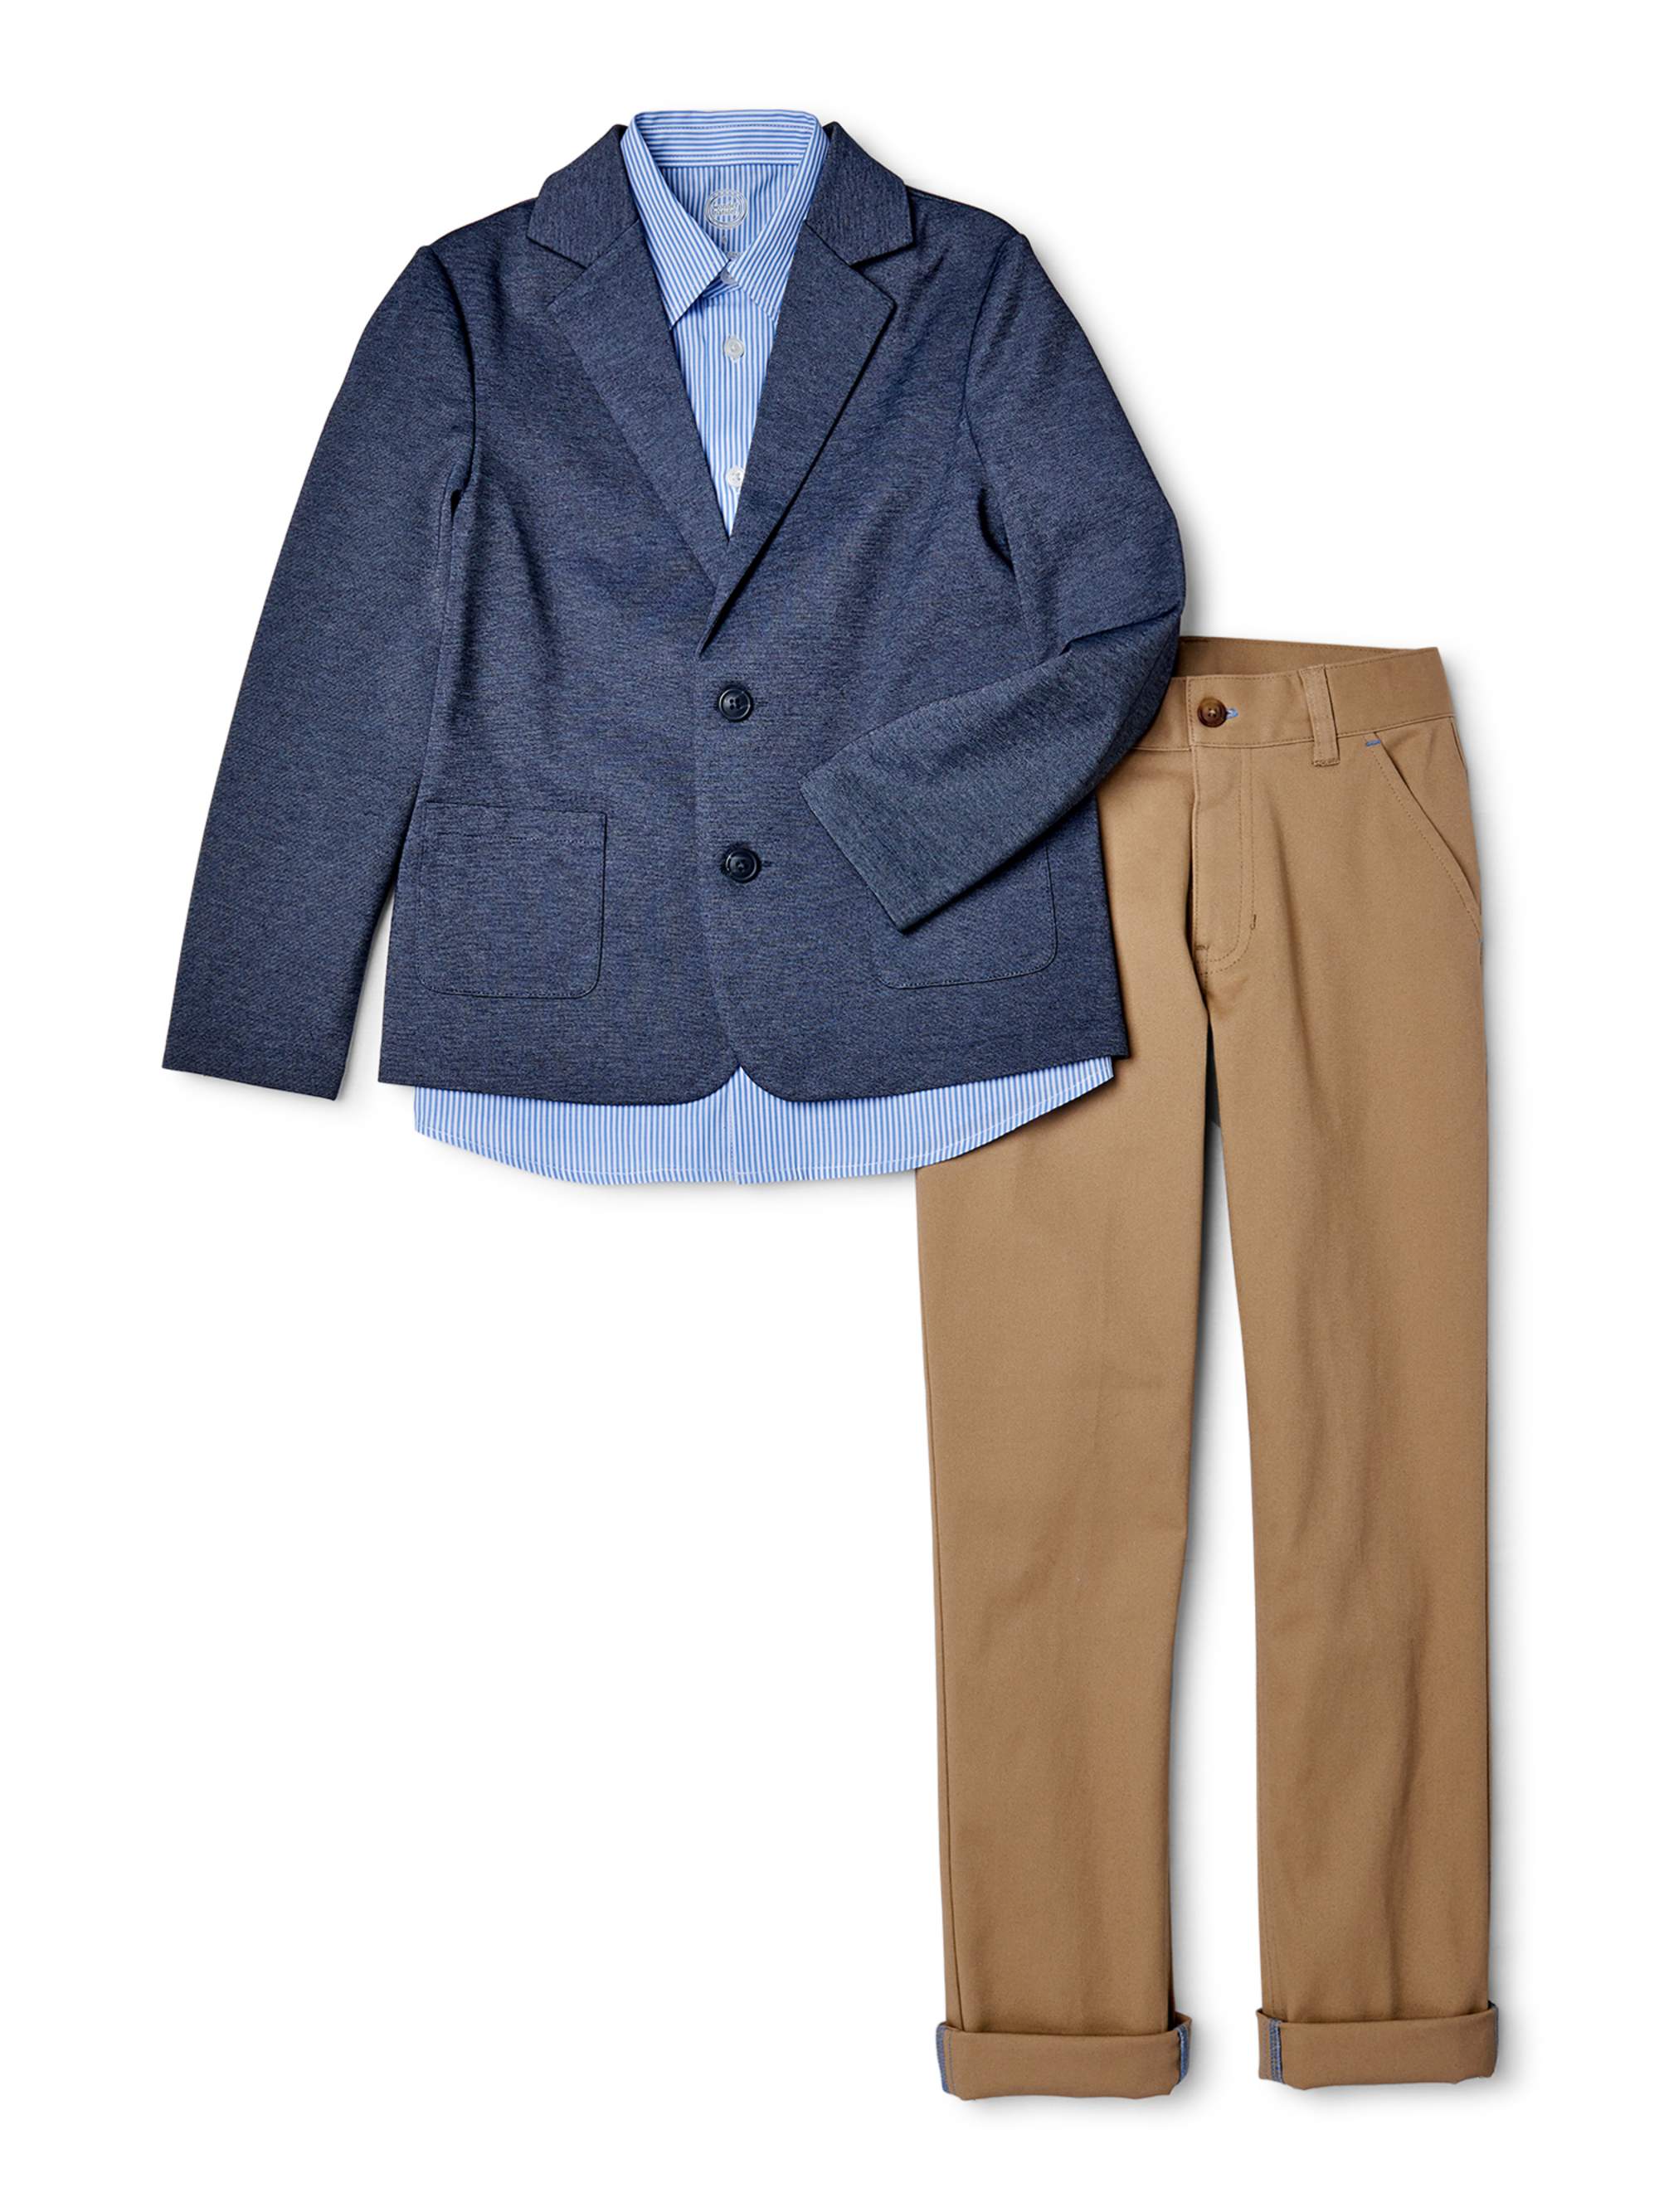 Wonder Nation Boys 4-14 & Husky Suit Set with Knit Blazer, Button-up Shirt and Pants, 3-Piece Outfit Set - image 1 of 2